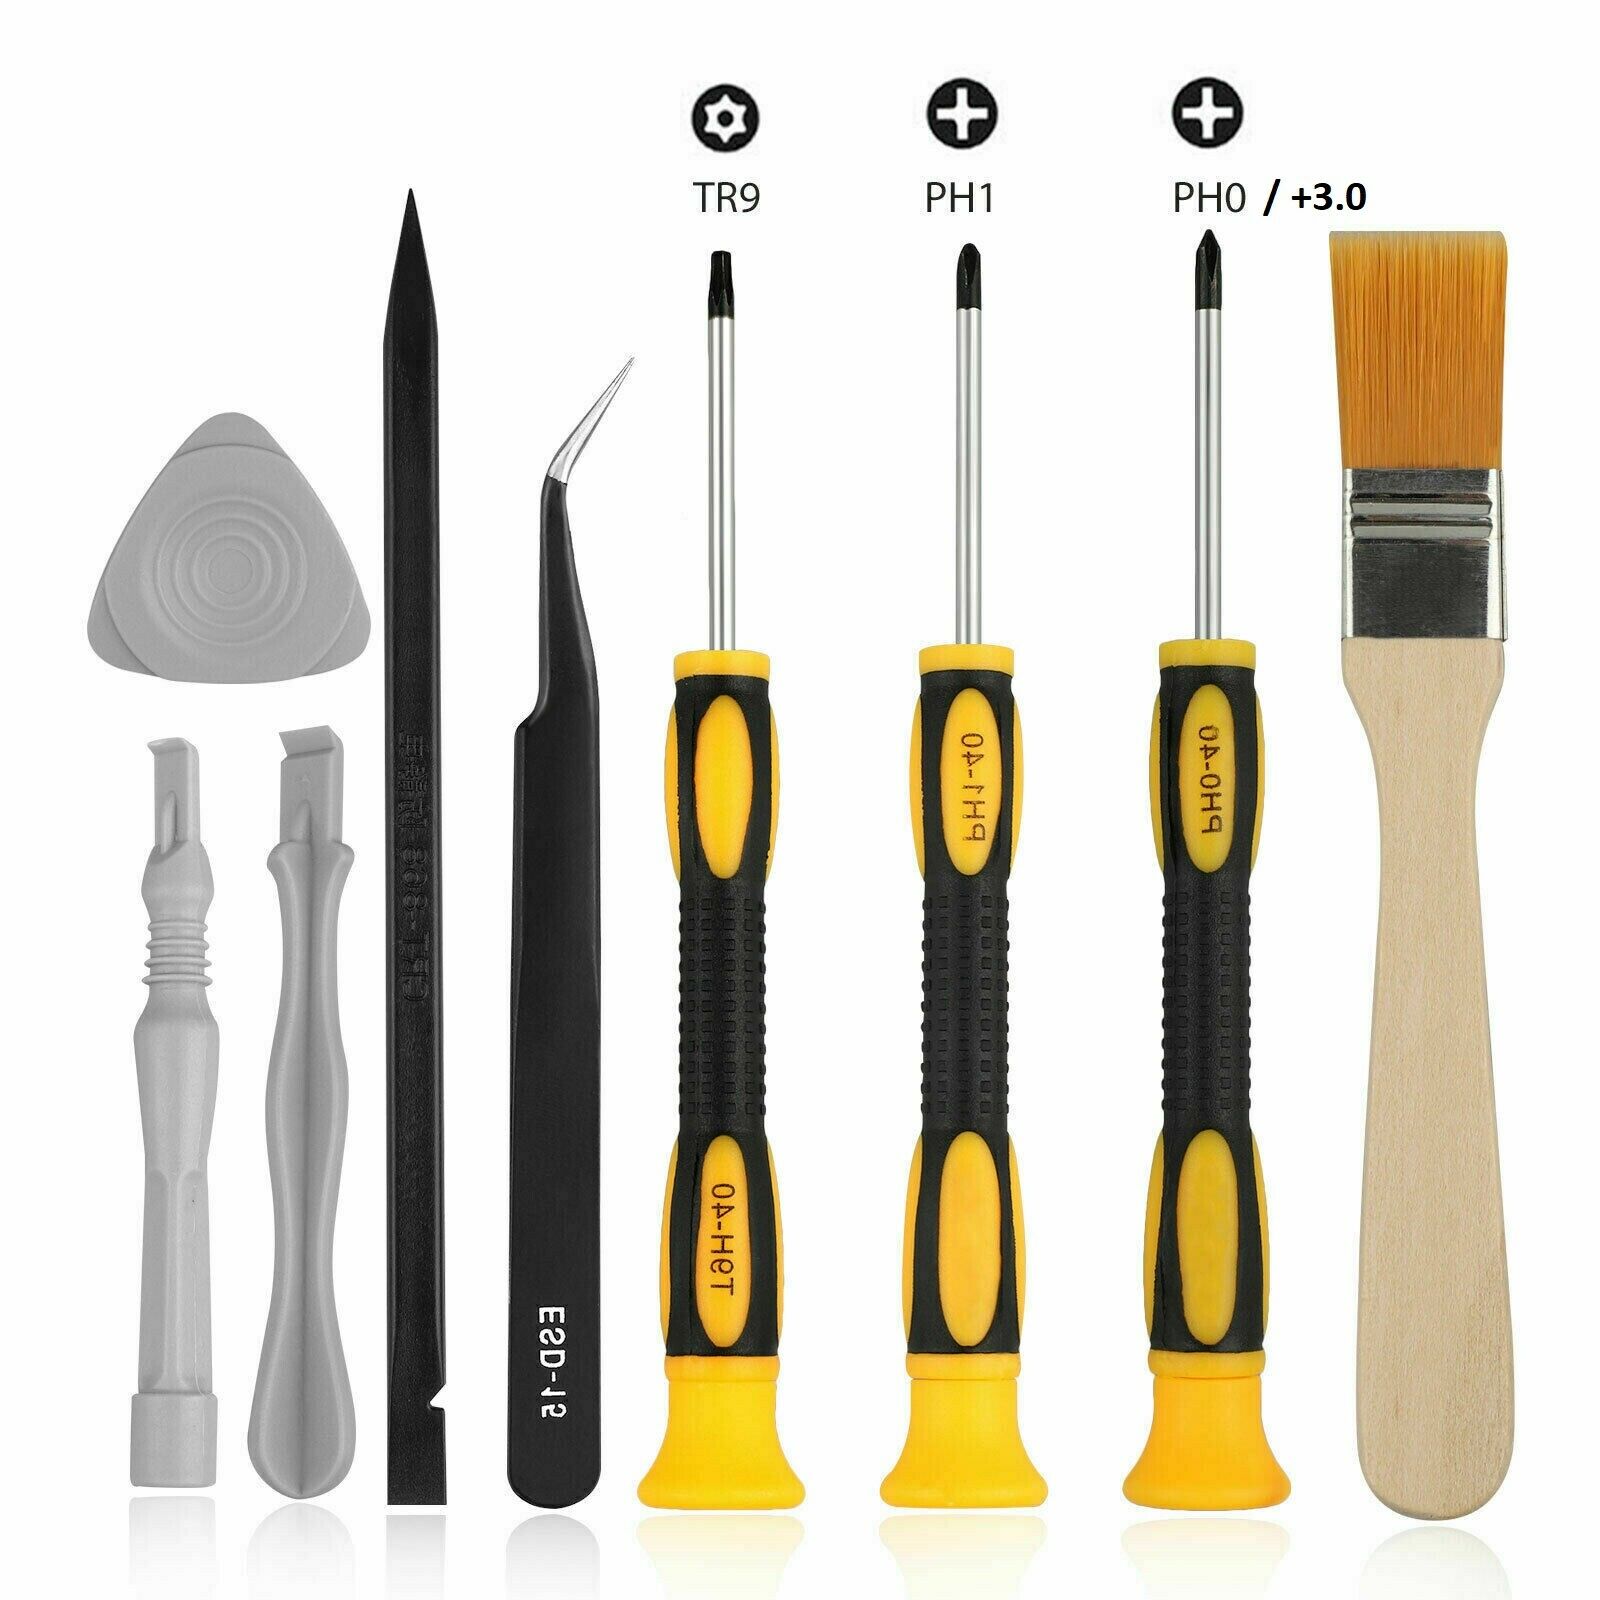 Screwdriver Opening Repair Cleaning Tool Kit For Ps4 Xbox Controller Console Set